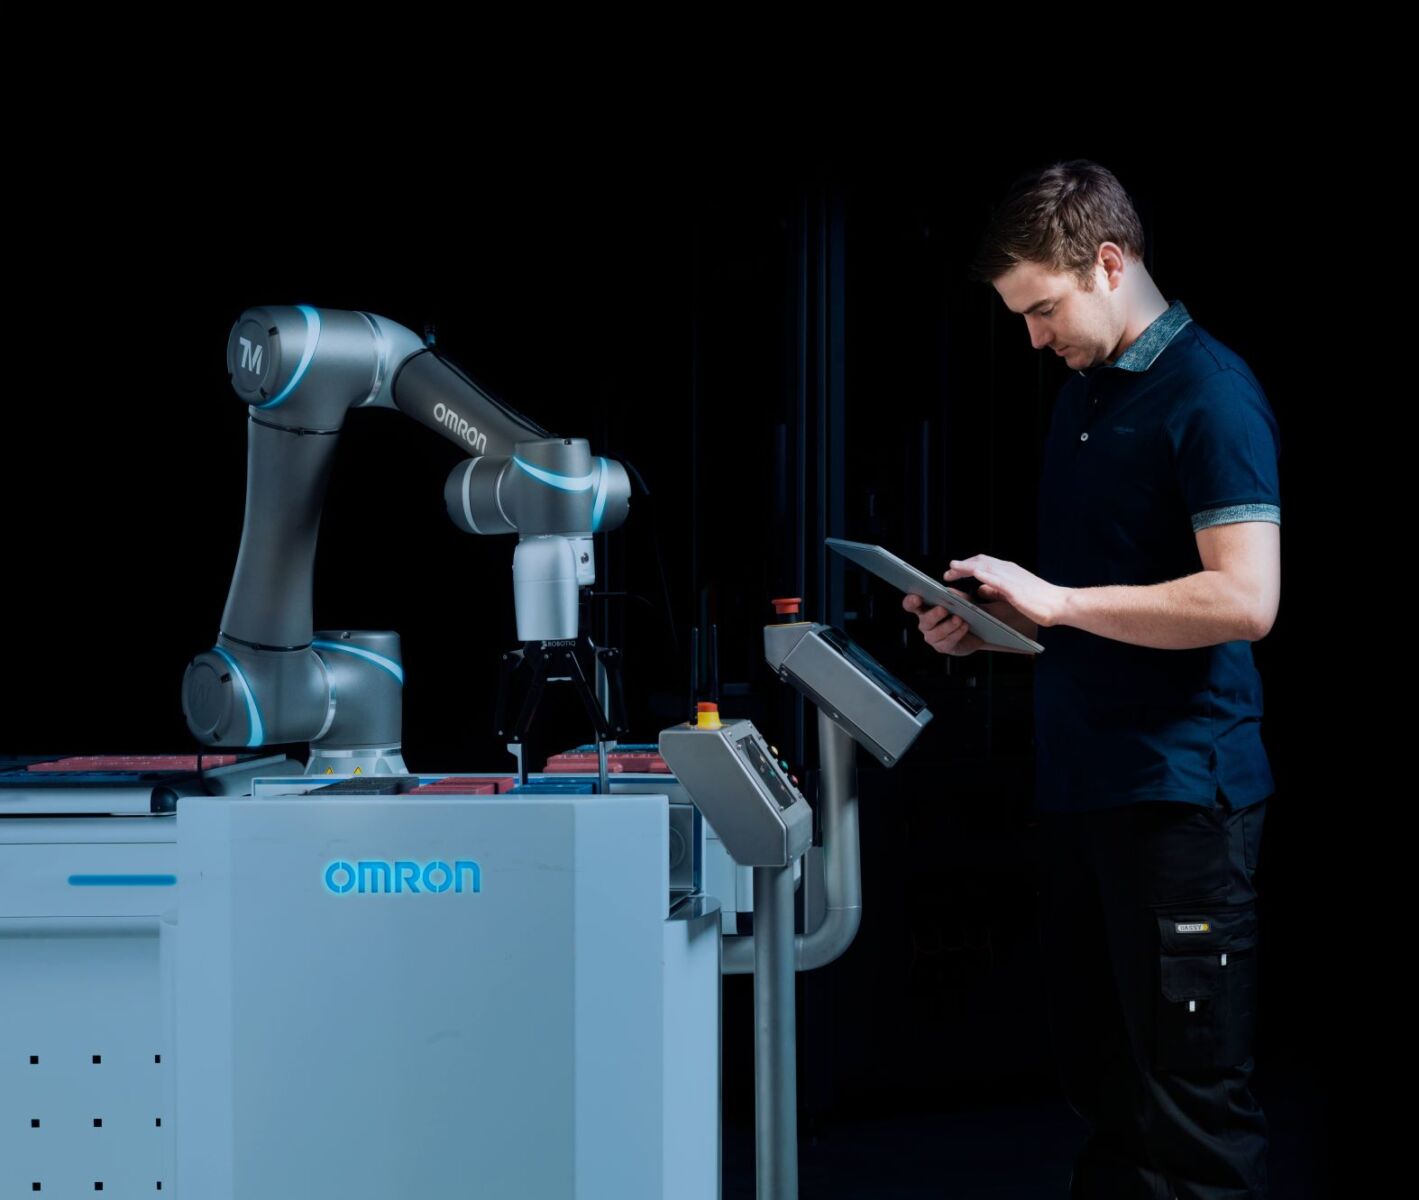 OMRON takes a 10% stake in Taiwanese cobot firm Techman Robot